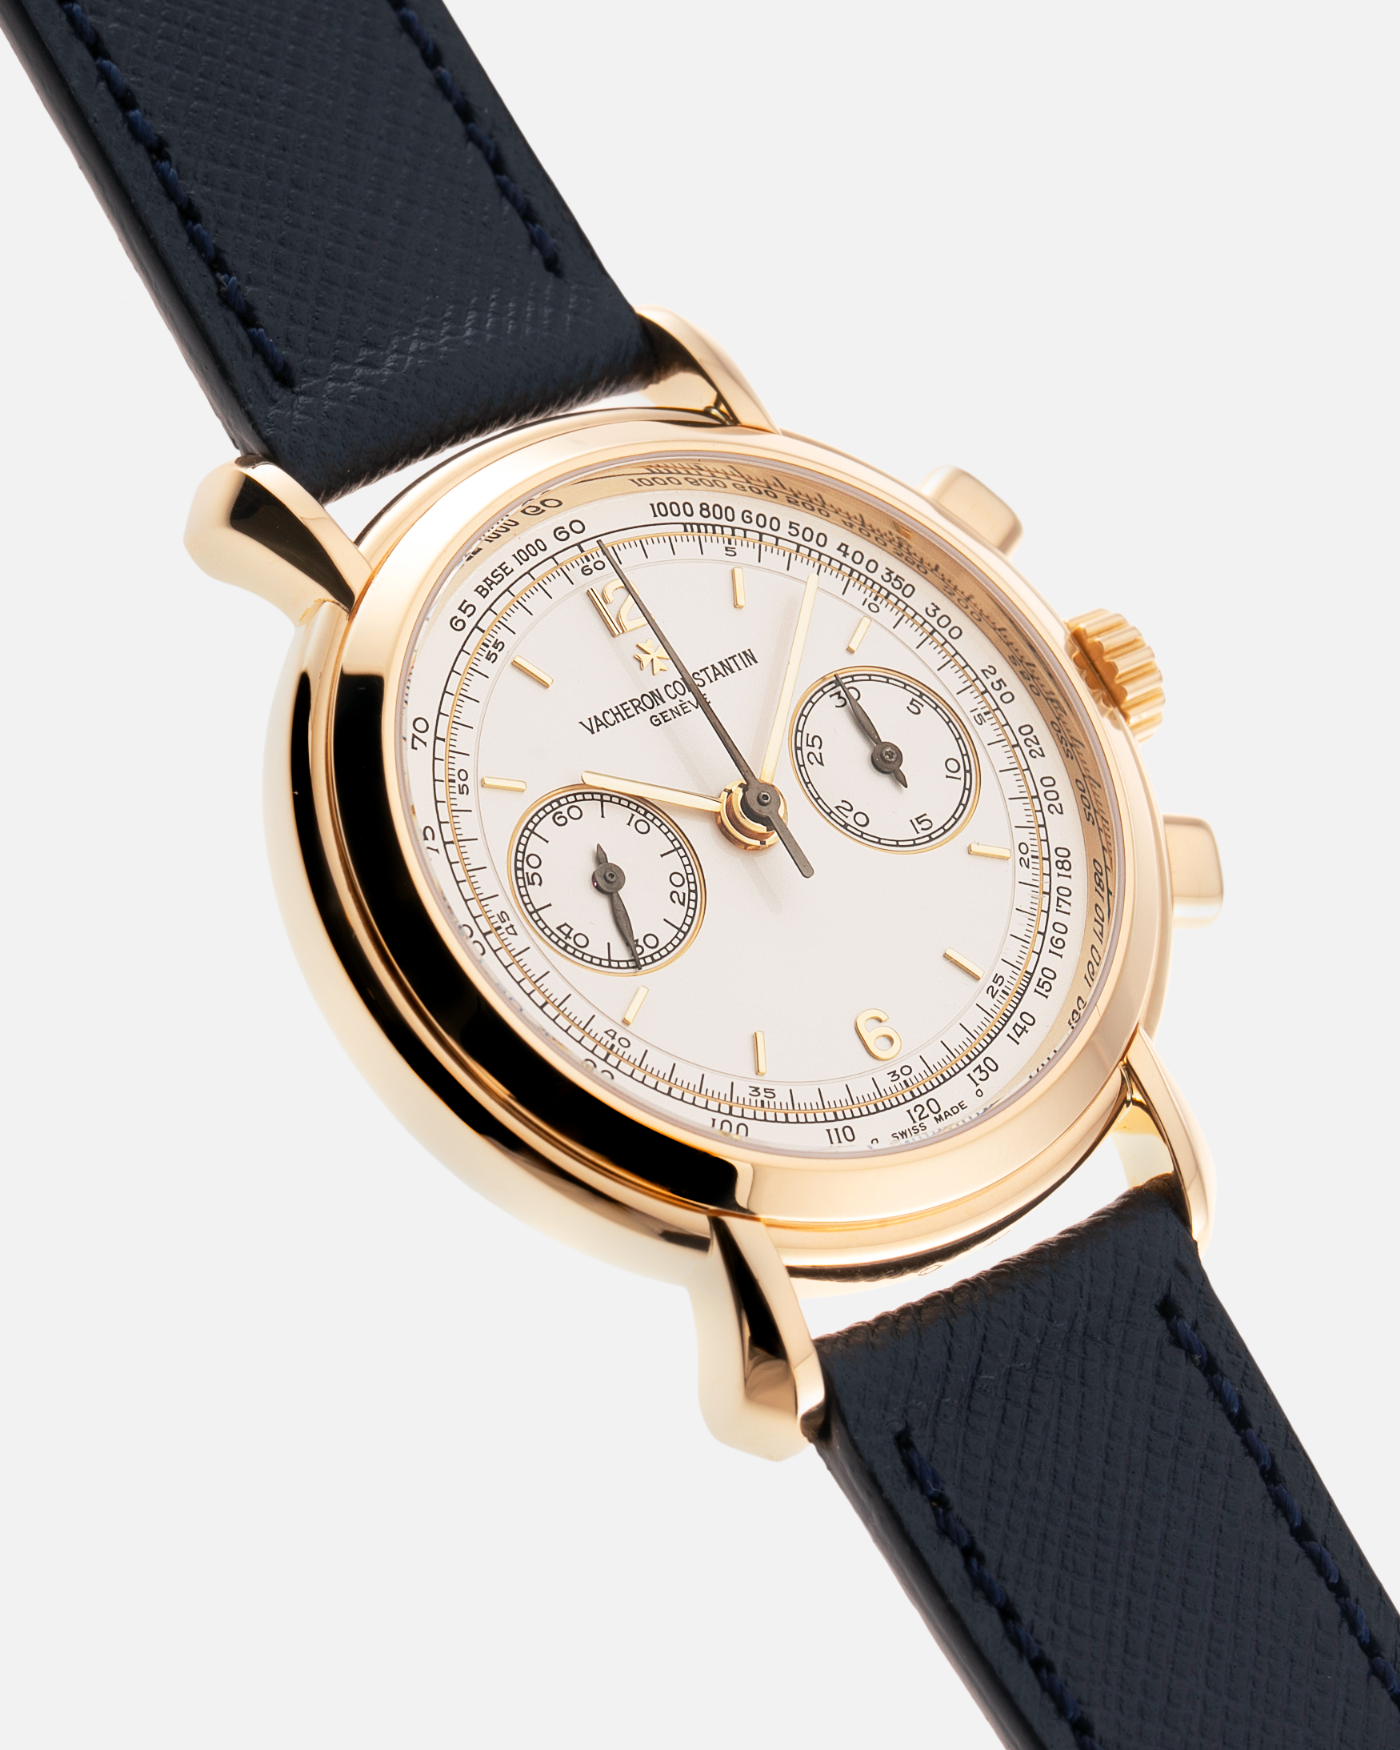 Brand: Vacheron Constantin Year: 1990’s Model: Les Historiques Chronograph  Reference Number: 47101 Material: 18k Yellow Gold Movement: Lemania 2320 Based Cal. 1141 Case Diameter: 37mm Bracelet: Molequin Navy Blue Textured Calf with 18k Yellow Gold Tang Buckle